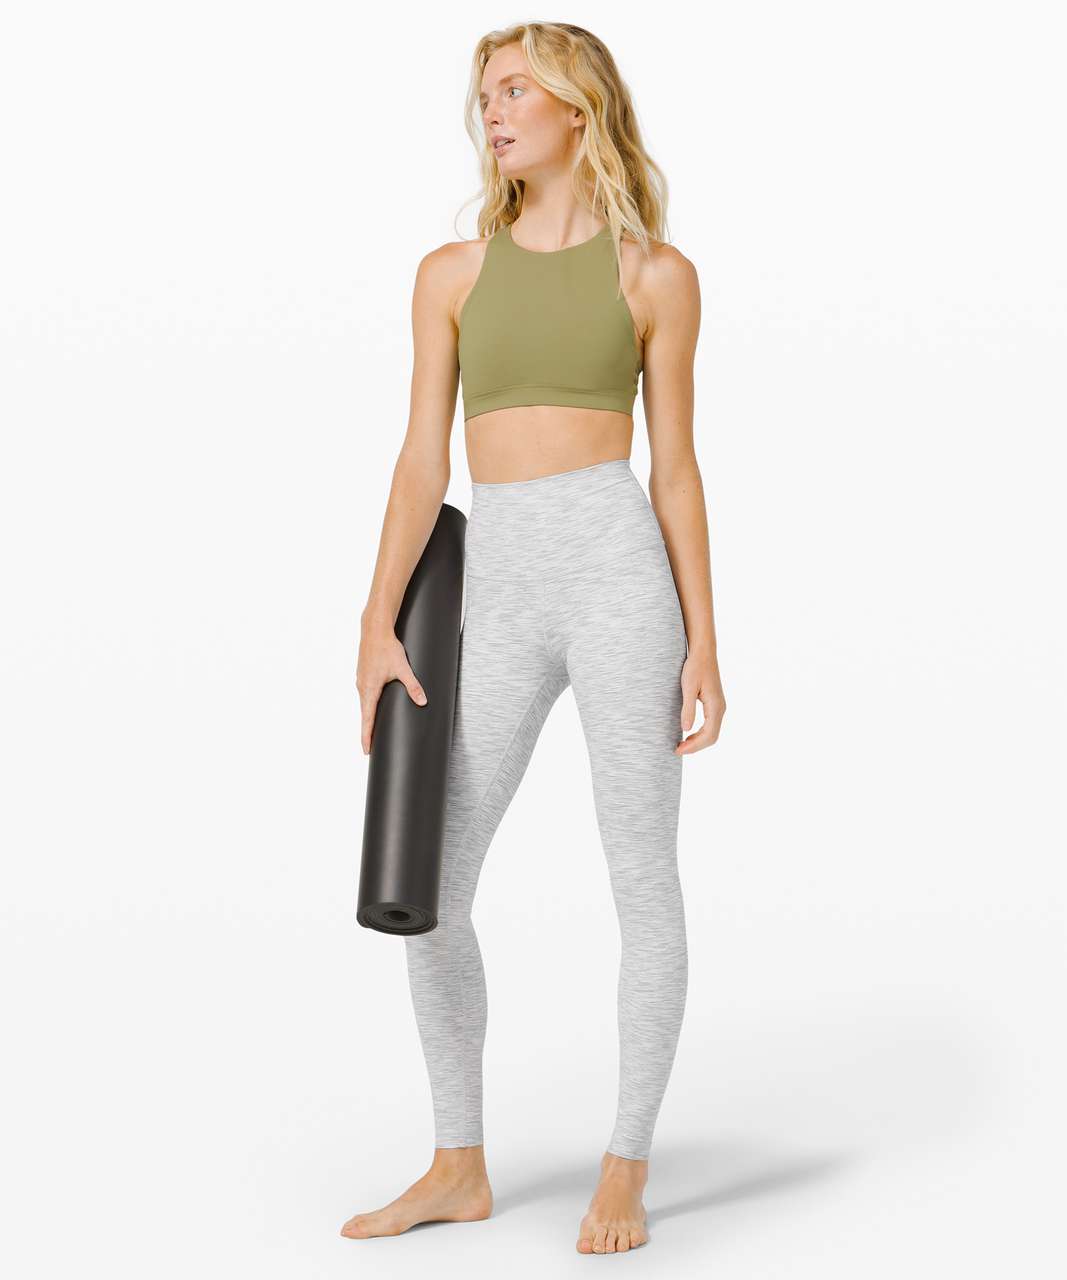 Lululemon Wunder Under Super High-Rise Tight *Luxtreme 28" - Wee Are From Space Nimbus Battleship